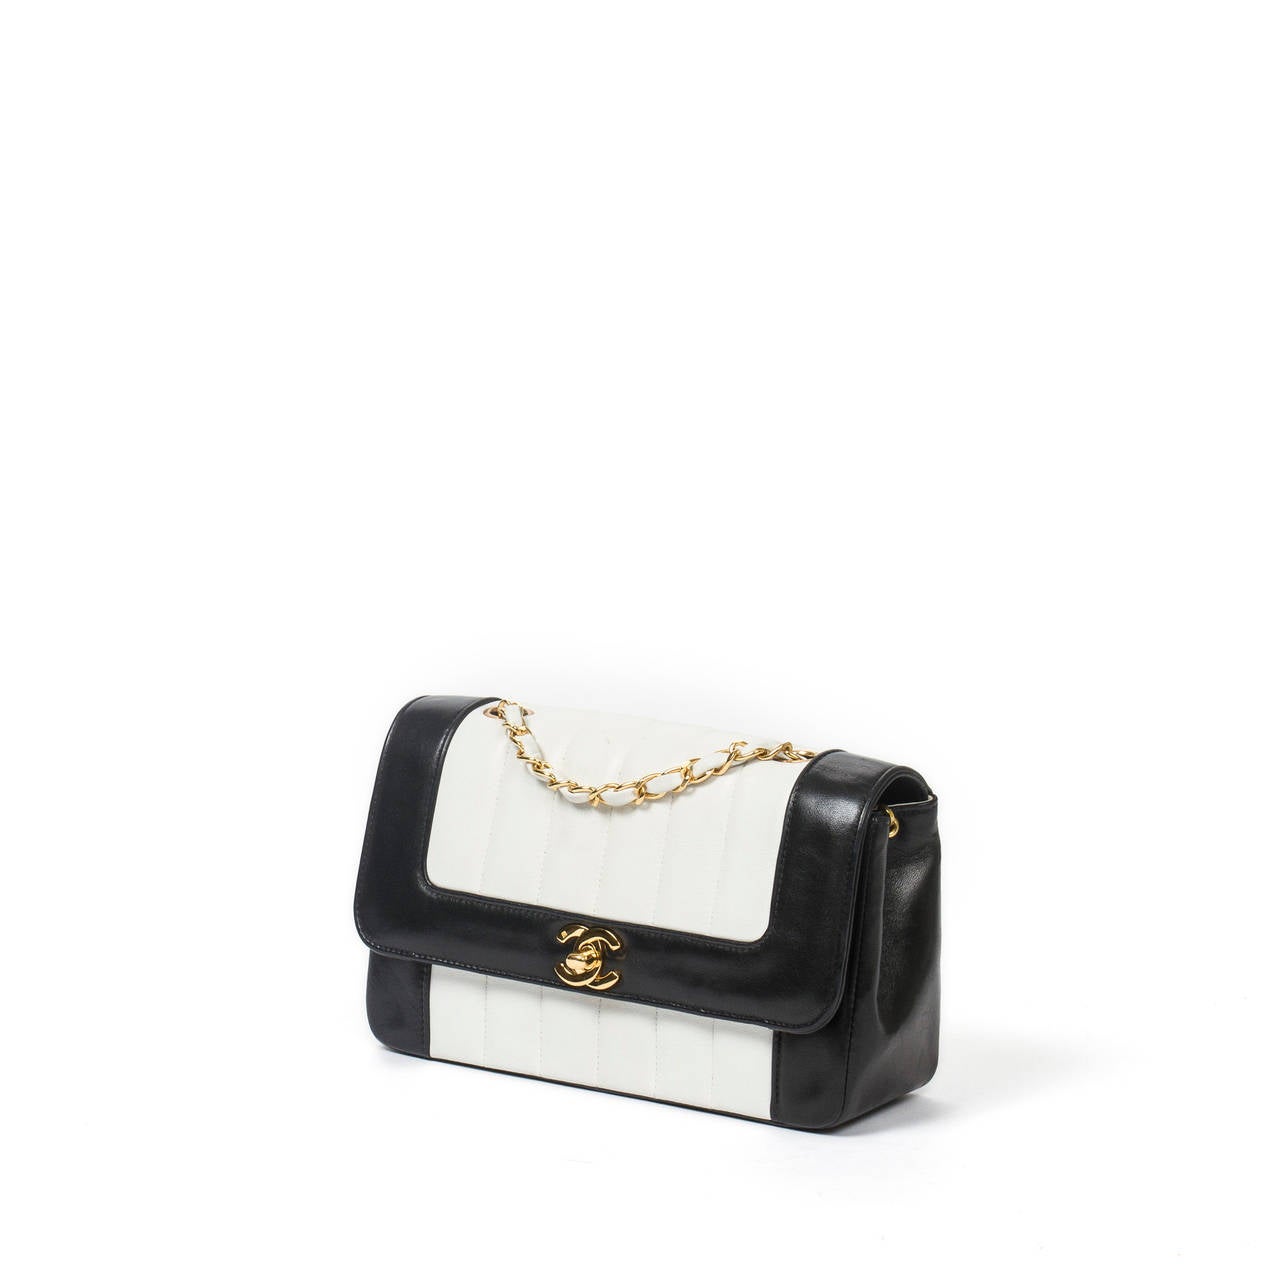 Chanel Vintage classic flap in black and white leather. Simple chain interlaced with white leather. Gold tone hardware. 